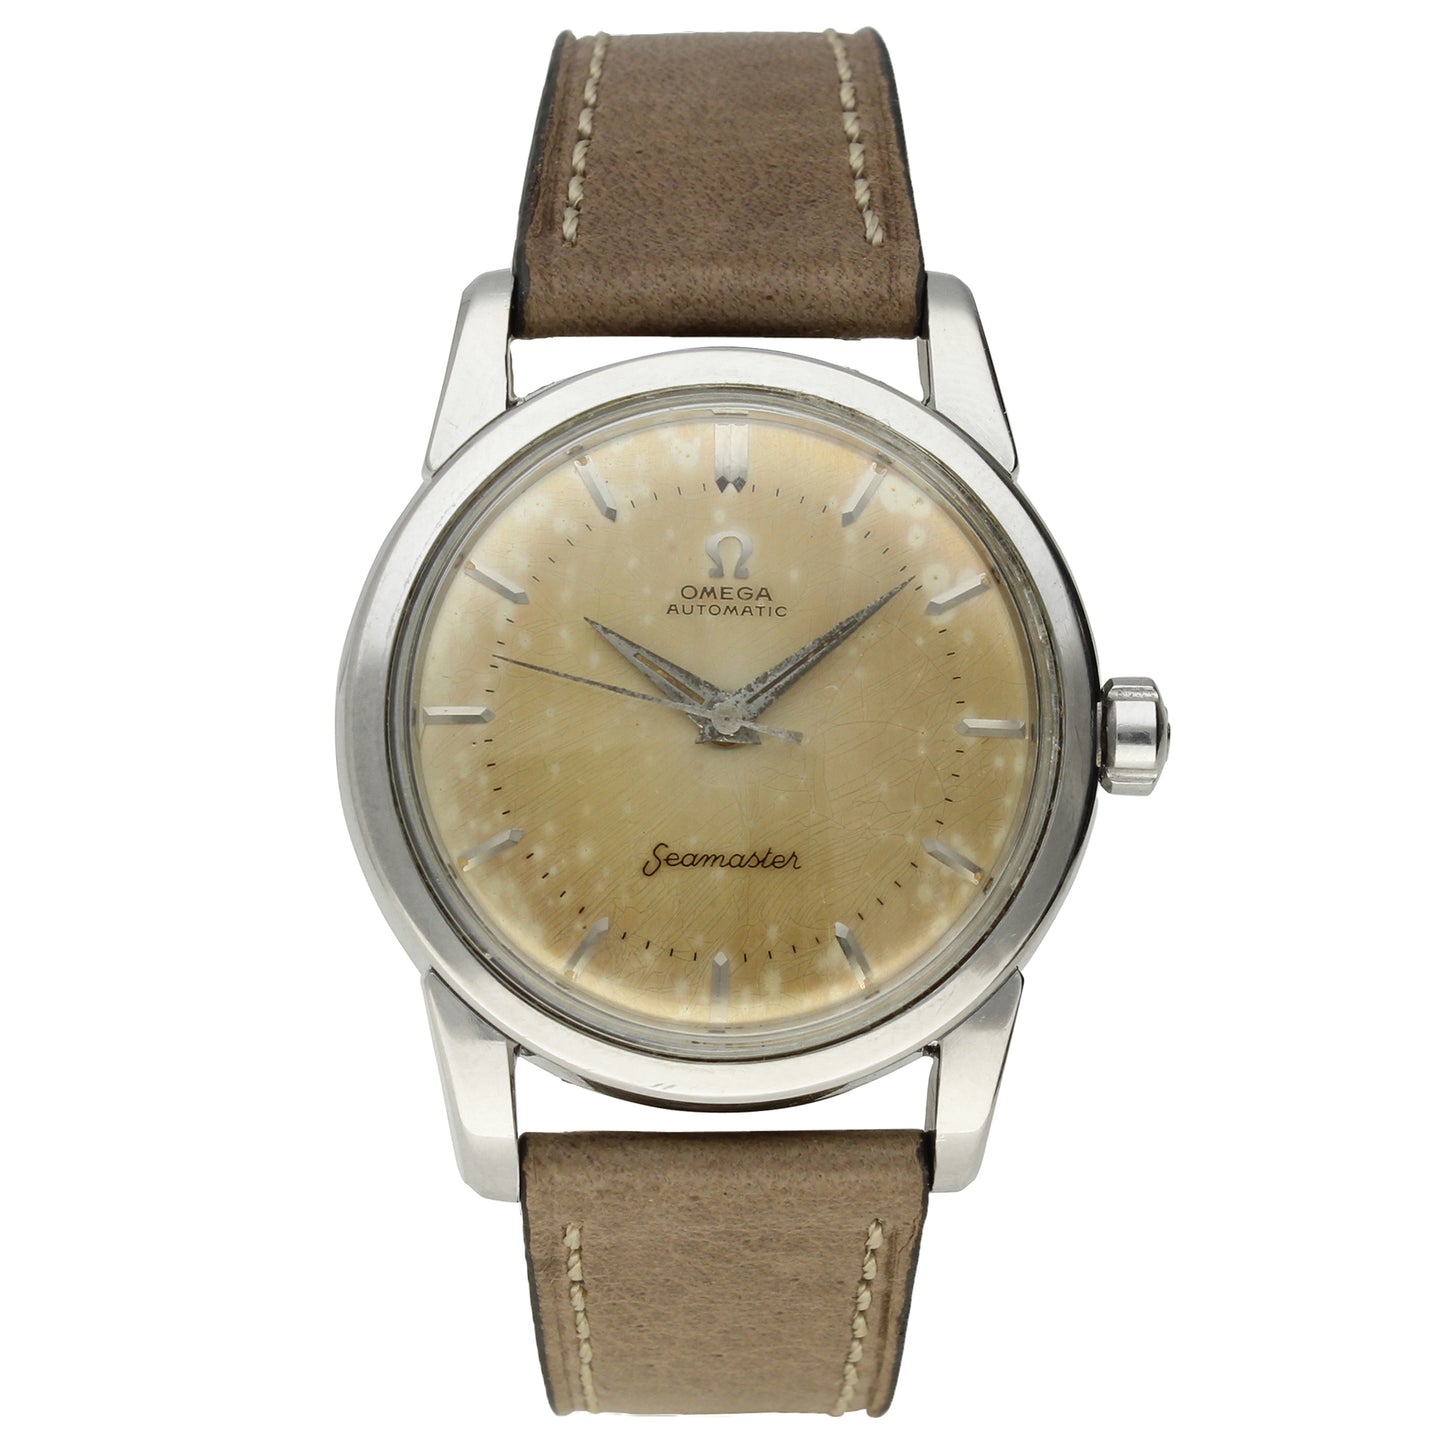 Stainless Steel Seamaster automatic wristwatch. Made 1956